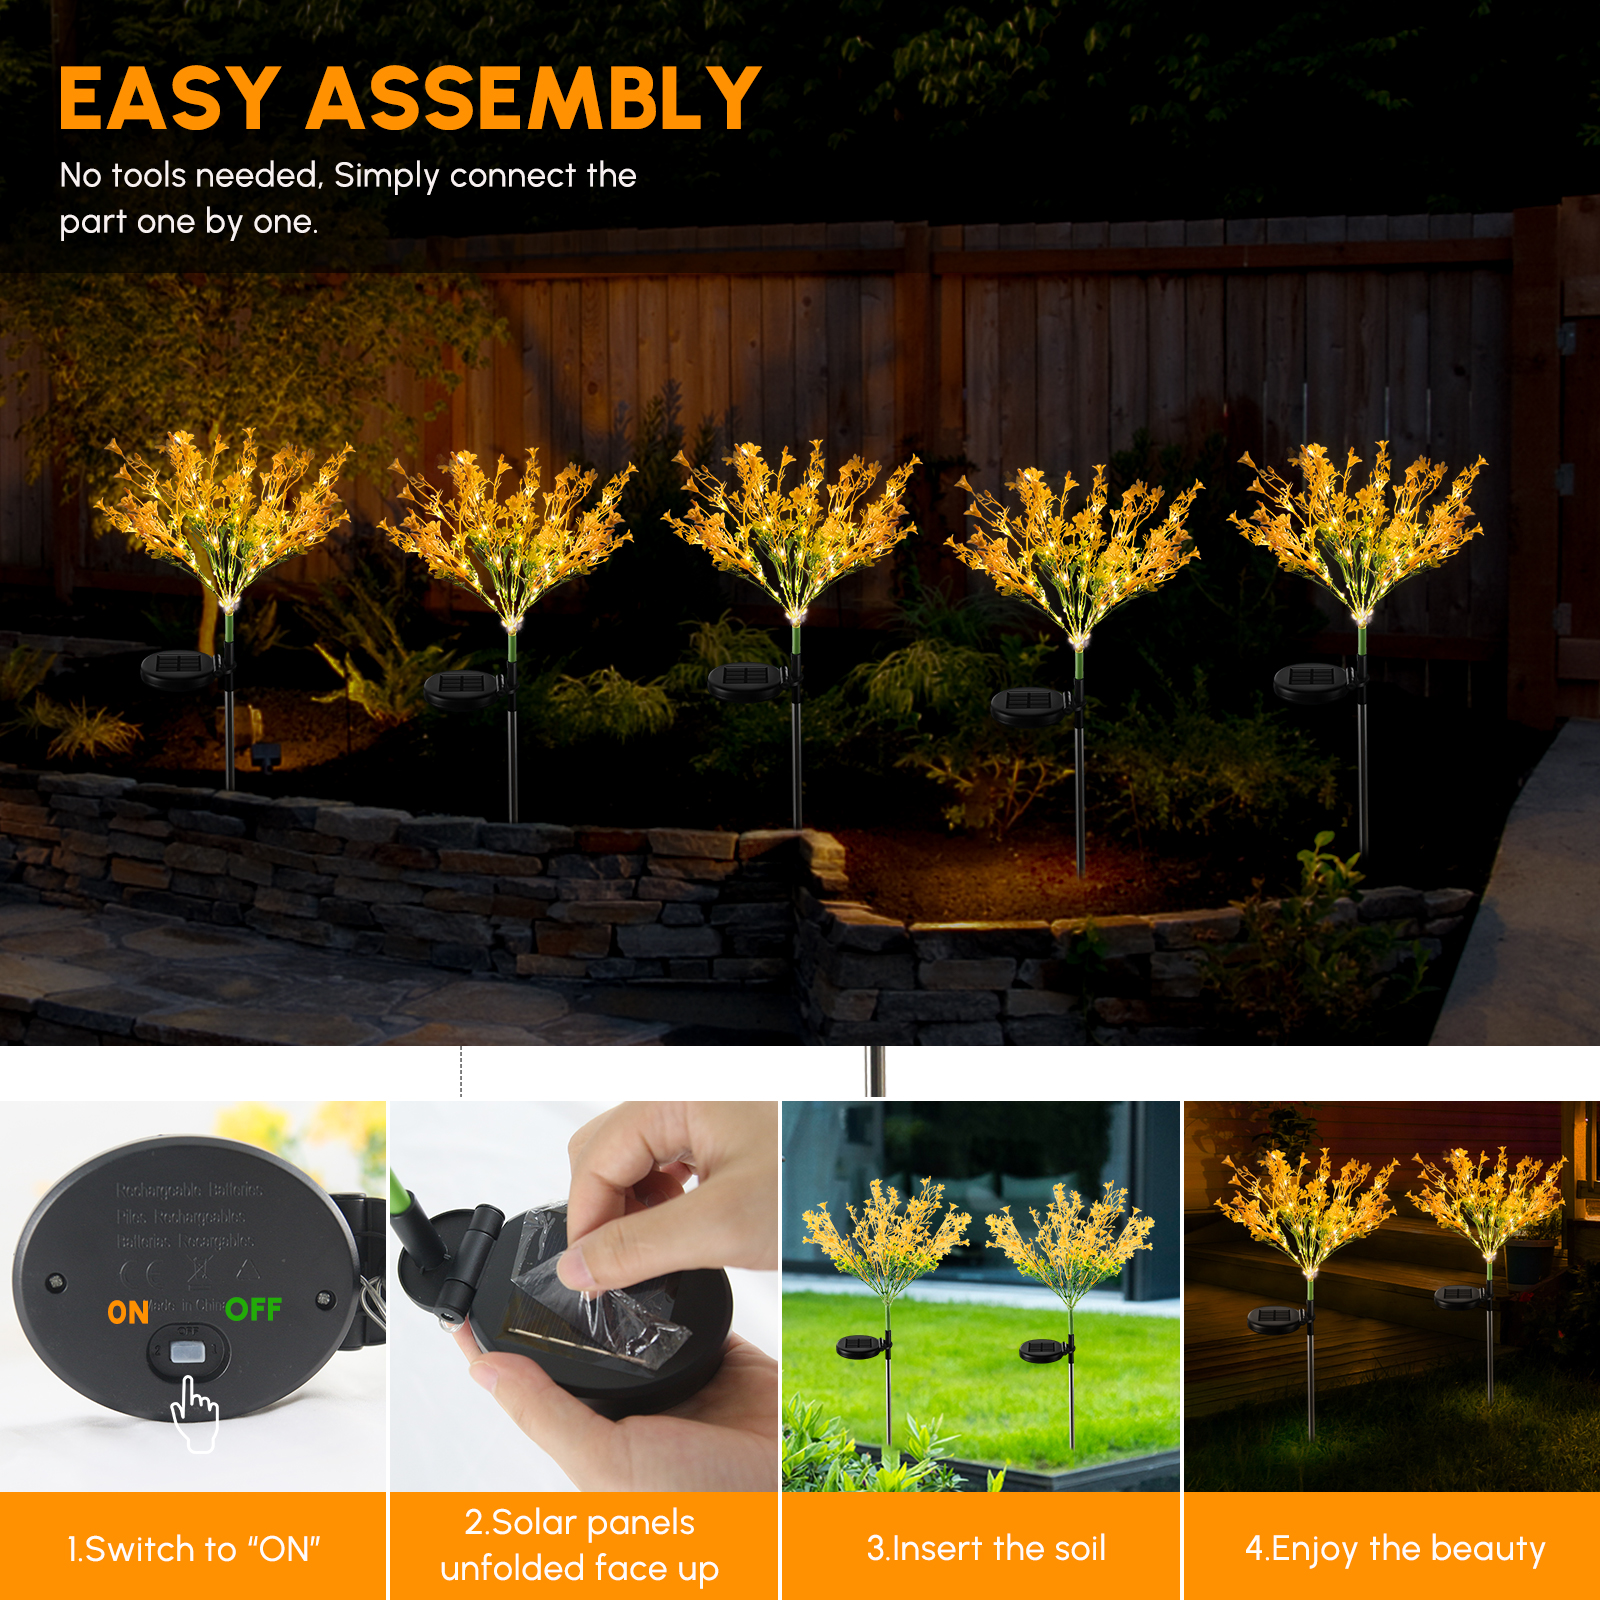 2 Pcs Solar Garden Lights for Outdoor Decorative, Solar Flowers Lights from Dusk to Dawn, Solar Garden Stake Lights Waterproof IP65, Solar Powered Flower Lights for Patio, Garden, Yard, Lawn, Pathway - image 4 of 9